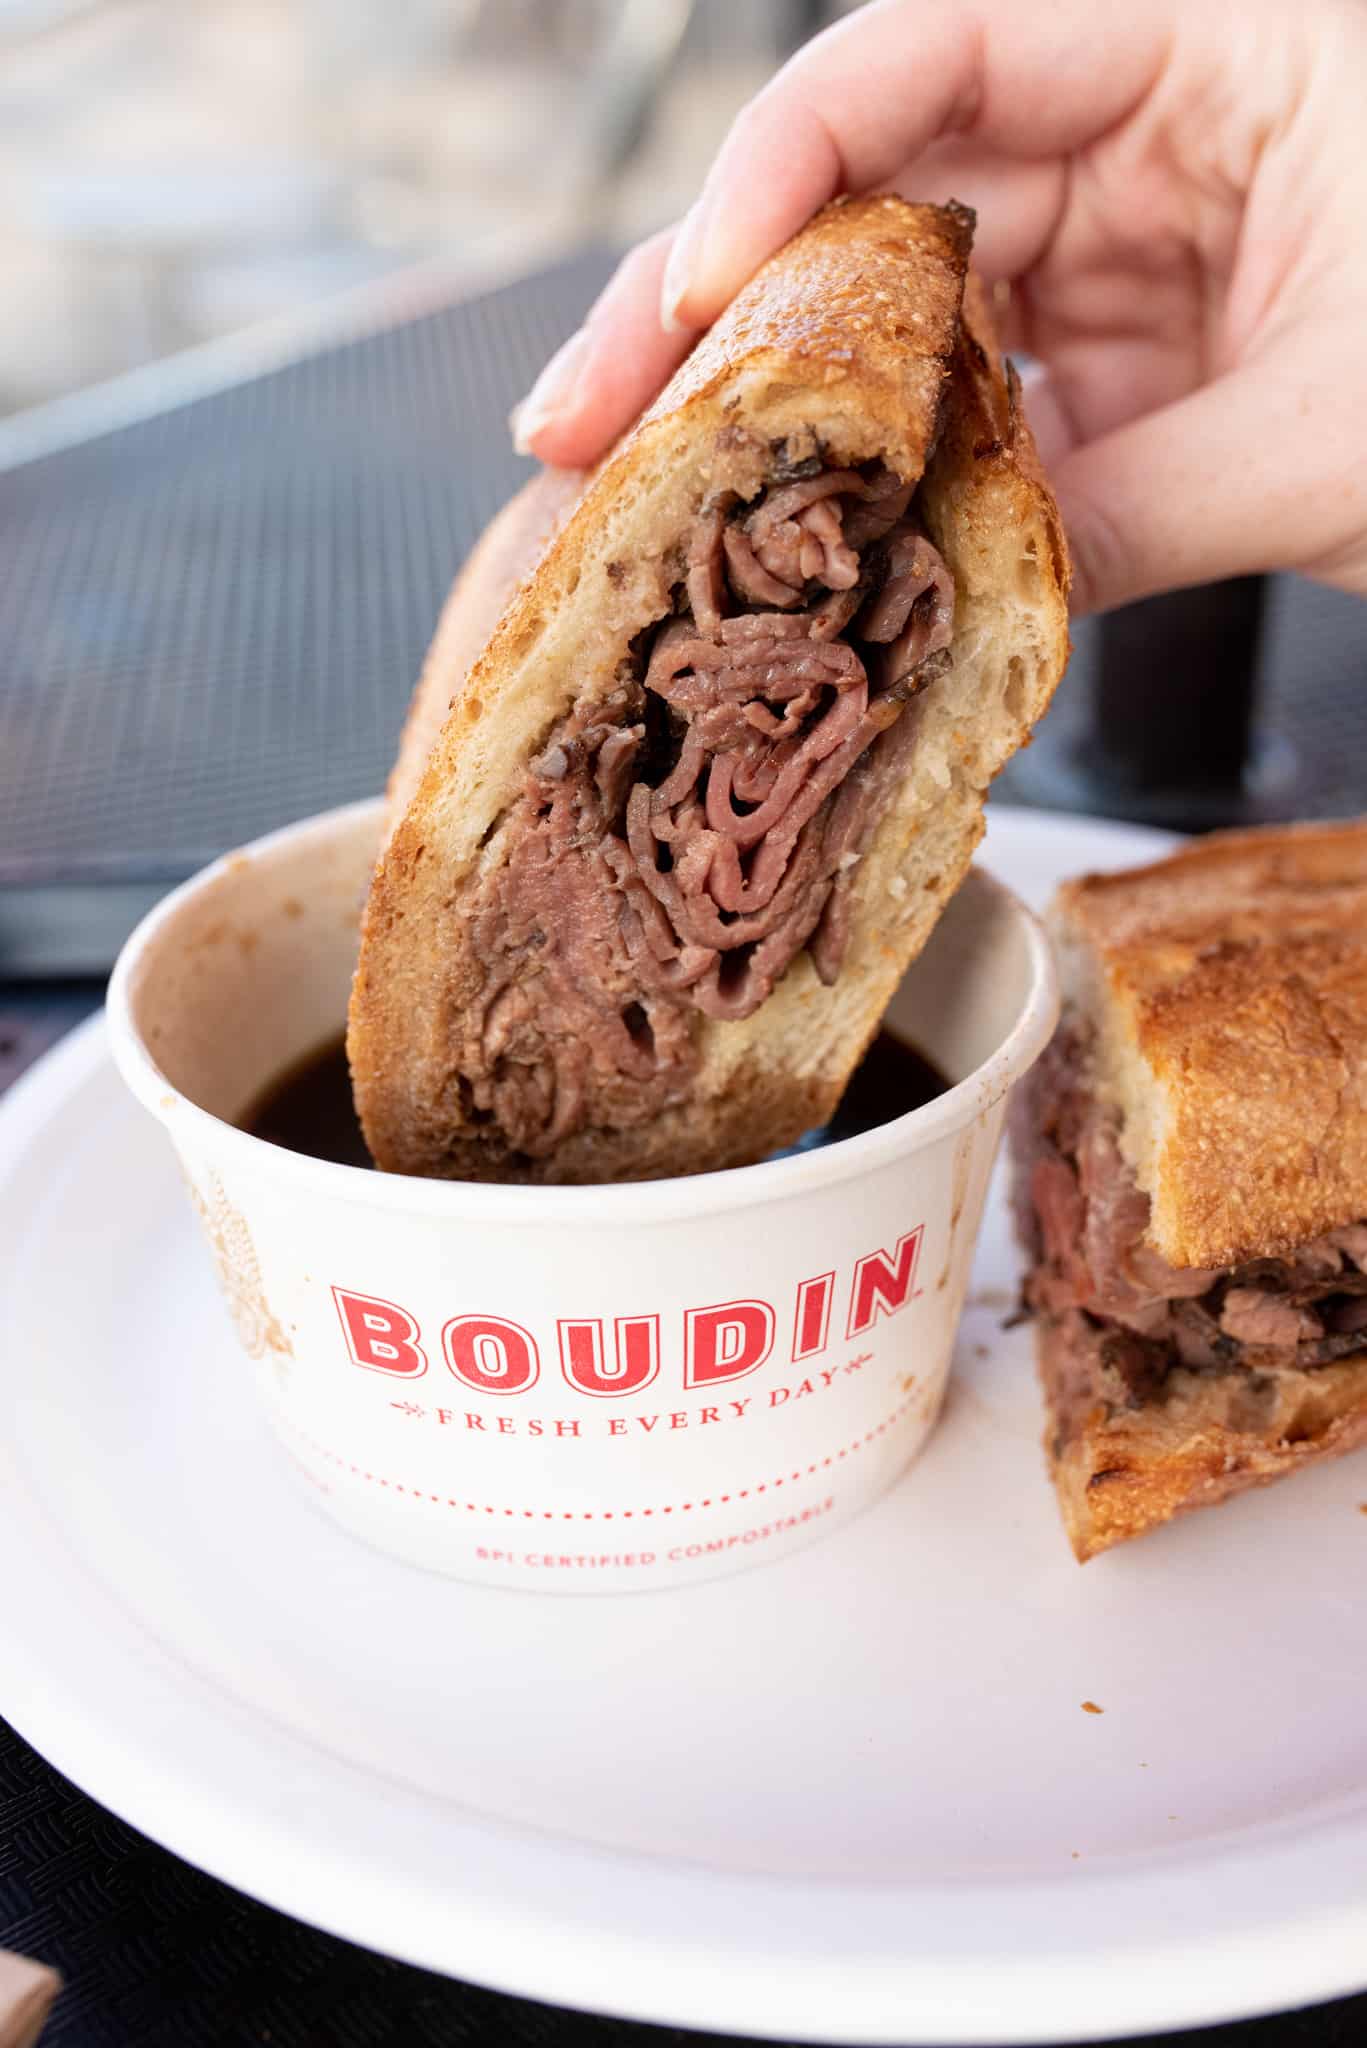 best sandwiches in san francisco: Classic french dip sandwich by Boudin